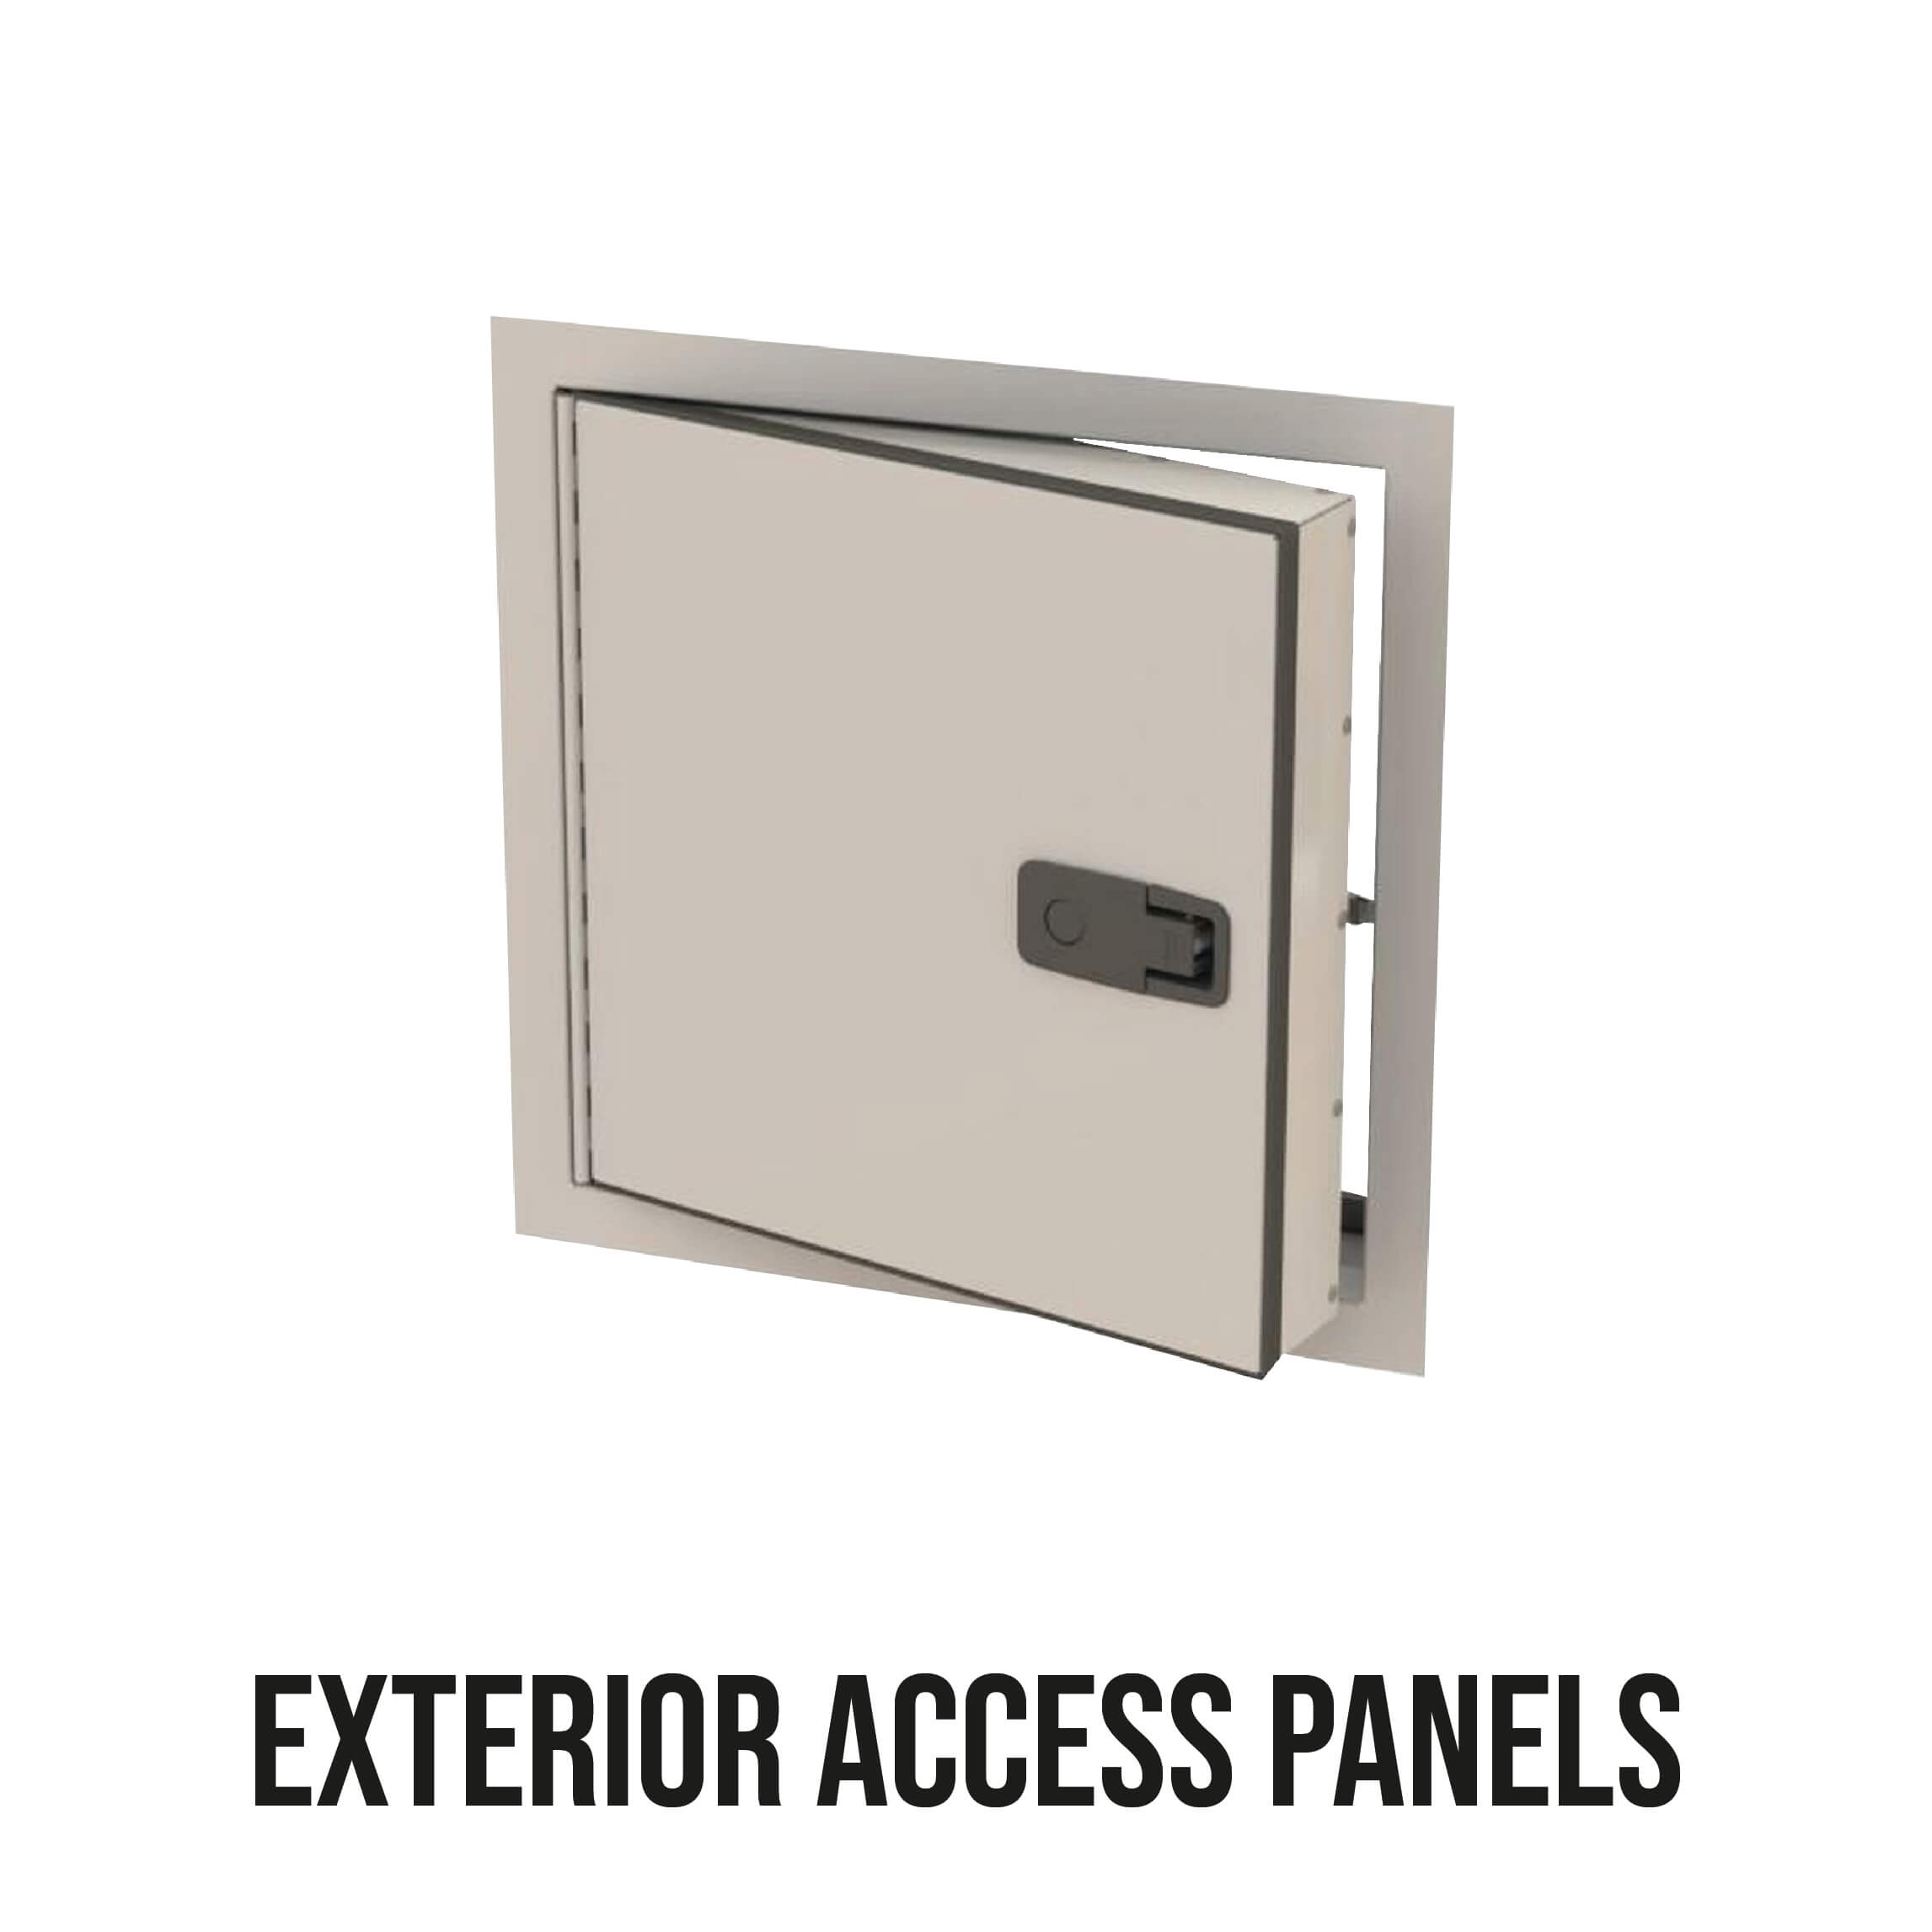 Check out our blog titled "5 Helpful Tips for Choosing the Right Access Door for Your Next Project" today!